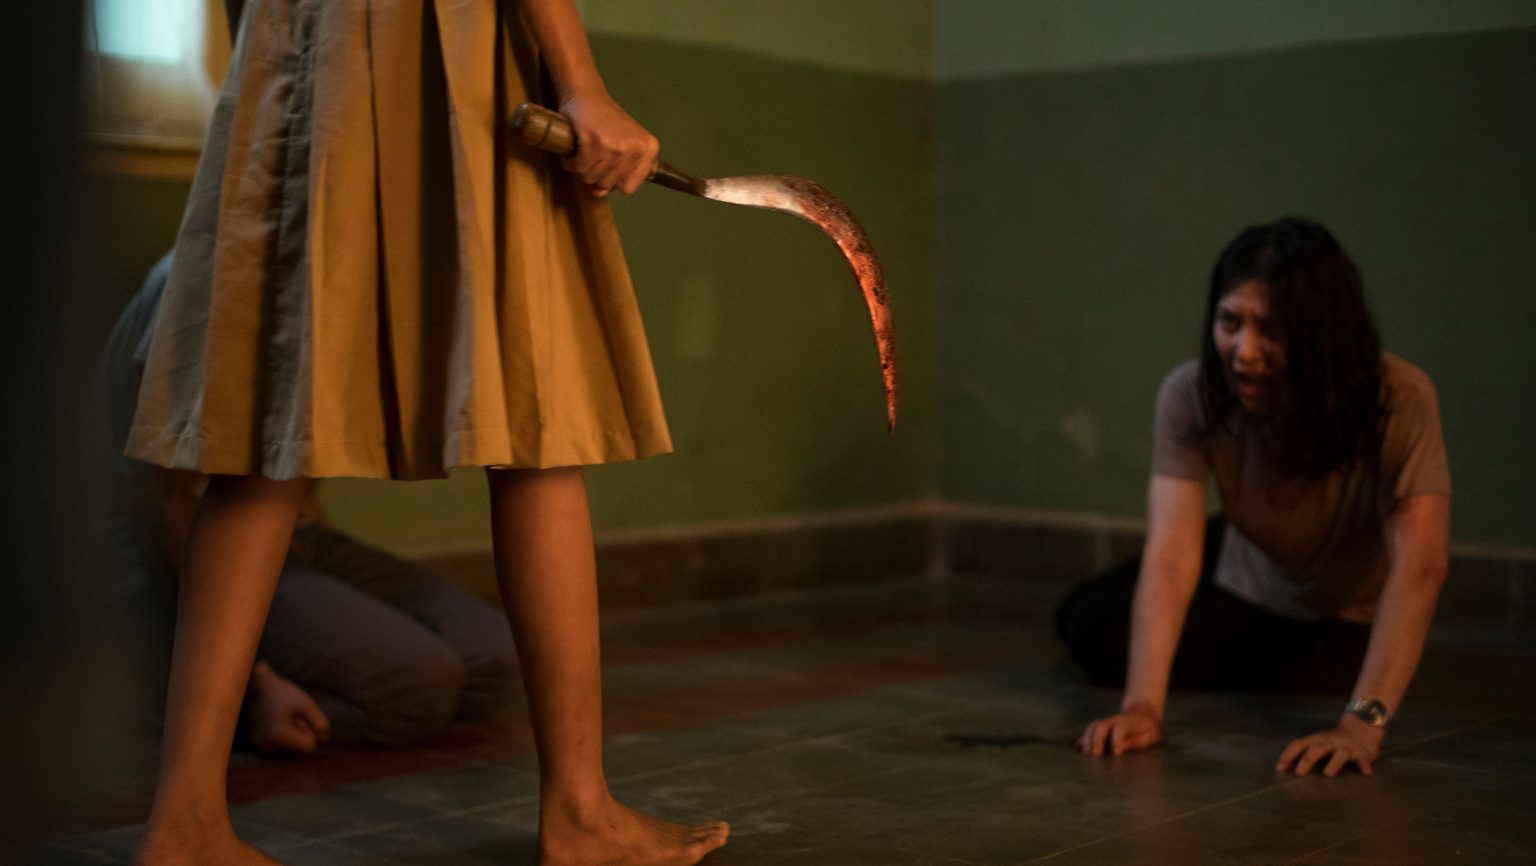 A woman looks in terror as someone in a dress approaches her with a bloody hook blade as seen in The Queen of Black Magic.